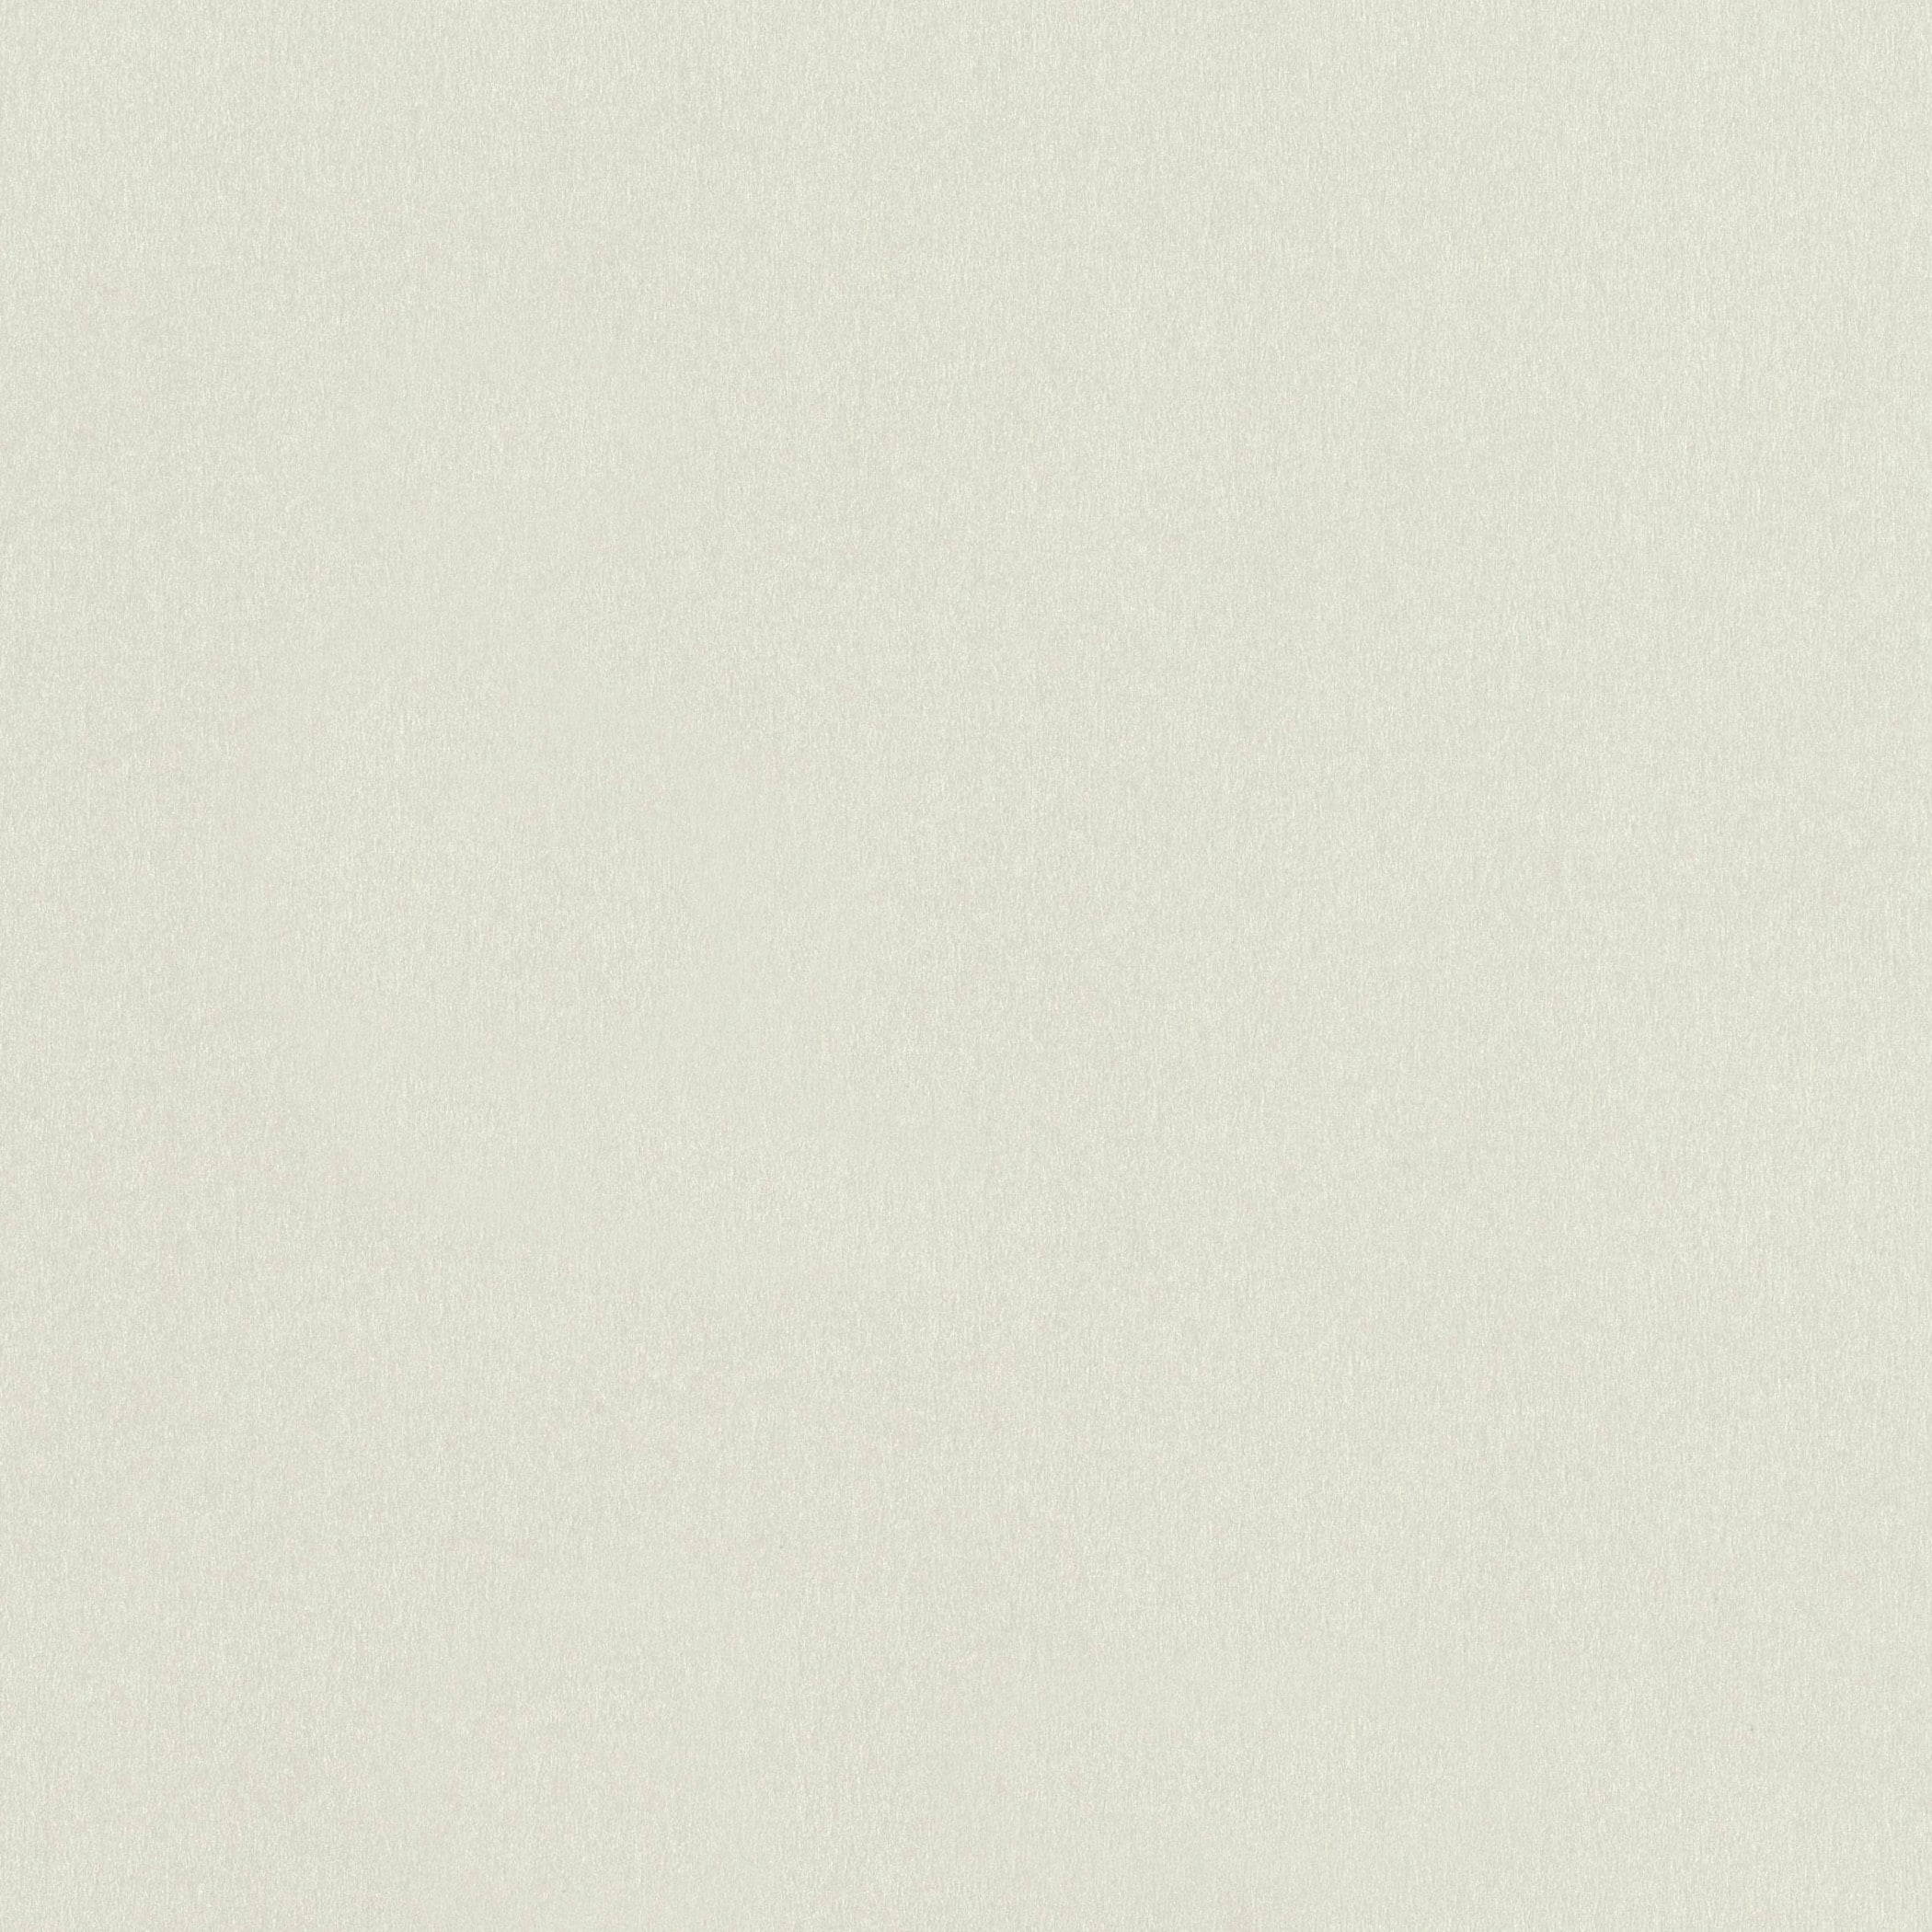 White 12 x 12 Cardstock Paper by Recollections 100 Sheets | Michaels